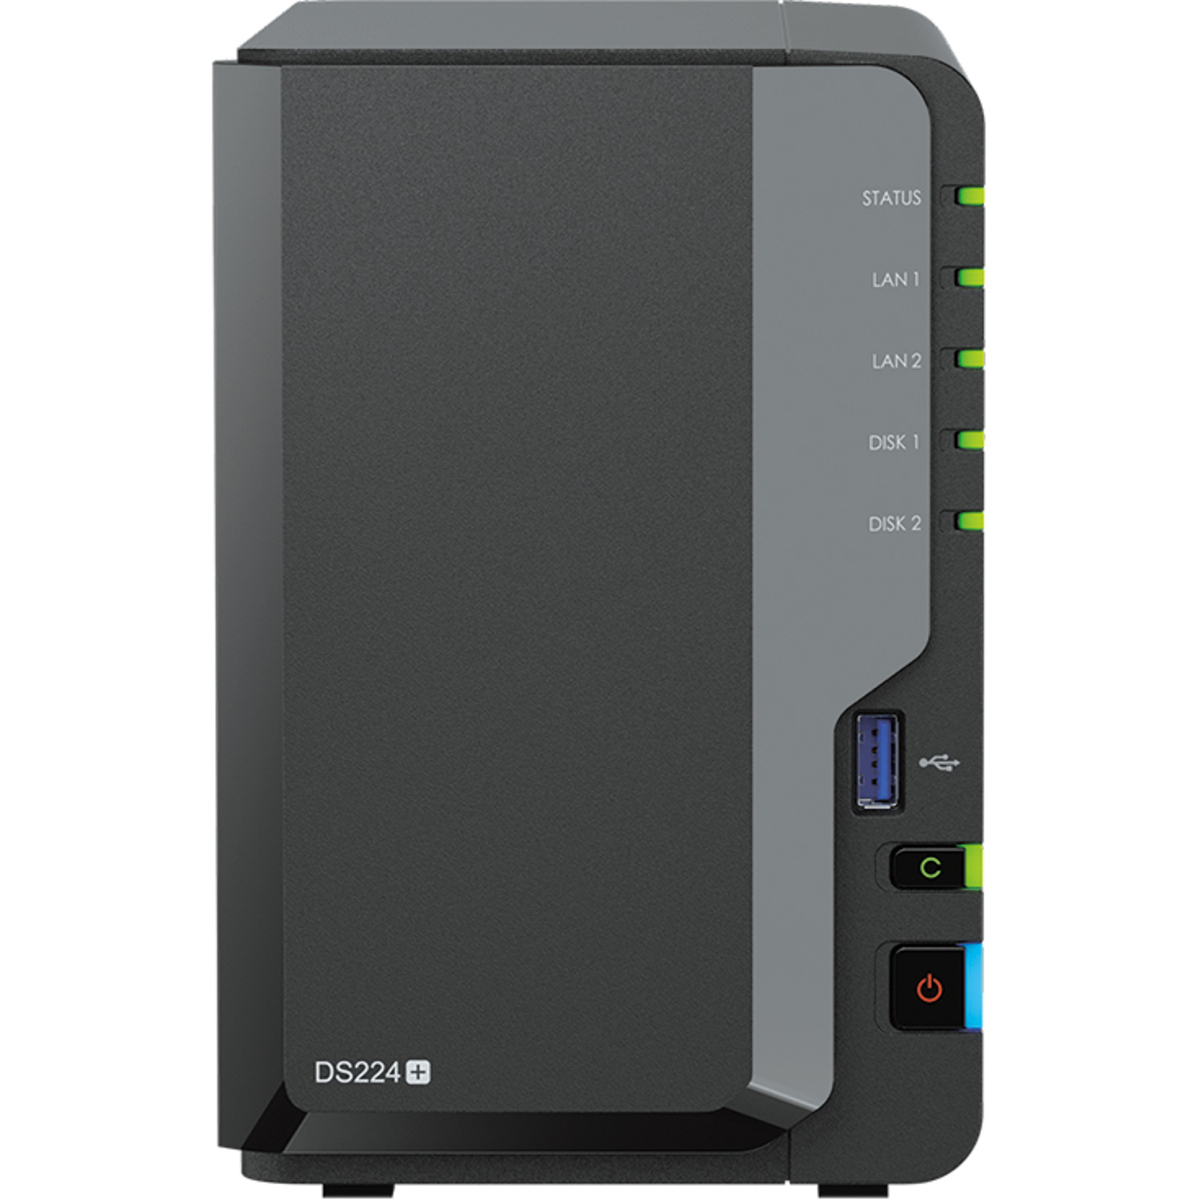 Synology DiskStation DS224+ 24tb 2-Bay Desktop Personal / Basic Home / Small Office NAS - Network Attached Storage Device 1x24tb Seagate IronWolf Pro ST24000NT002 3.5 7200rpm SATA 6Gb/s HDD NAS Class Drives Installed - Burn-In Tested - ON SALE - FREE RAM UPGRADE DiskStation DS224+